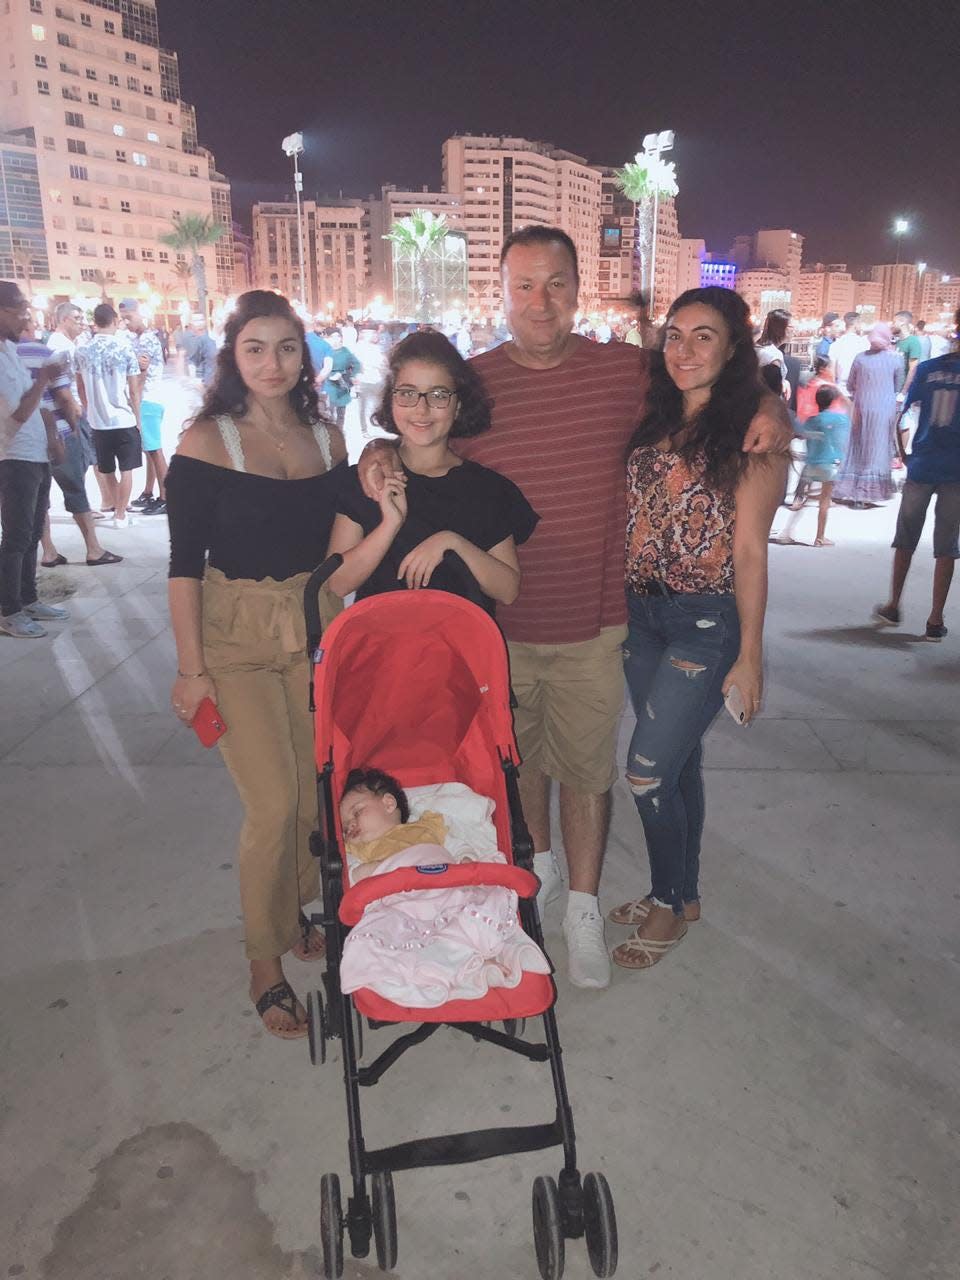 Family photo of Amina Alhaj-Omar, far right, a 26-year-old Ohio State University Graduate Student who went missing June 10. Police have since ended the search for her, though the investigation is ongoing.